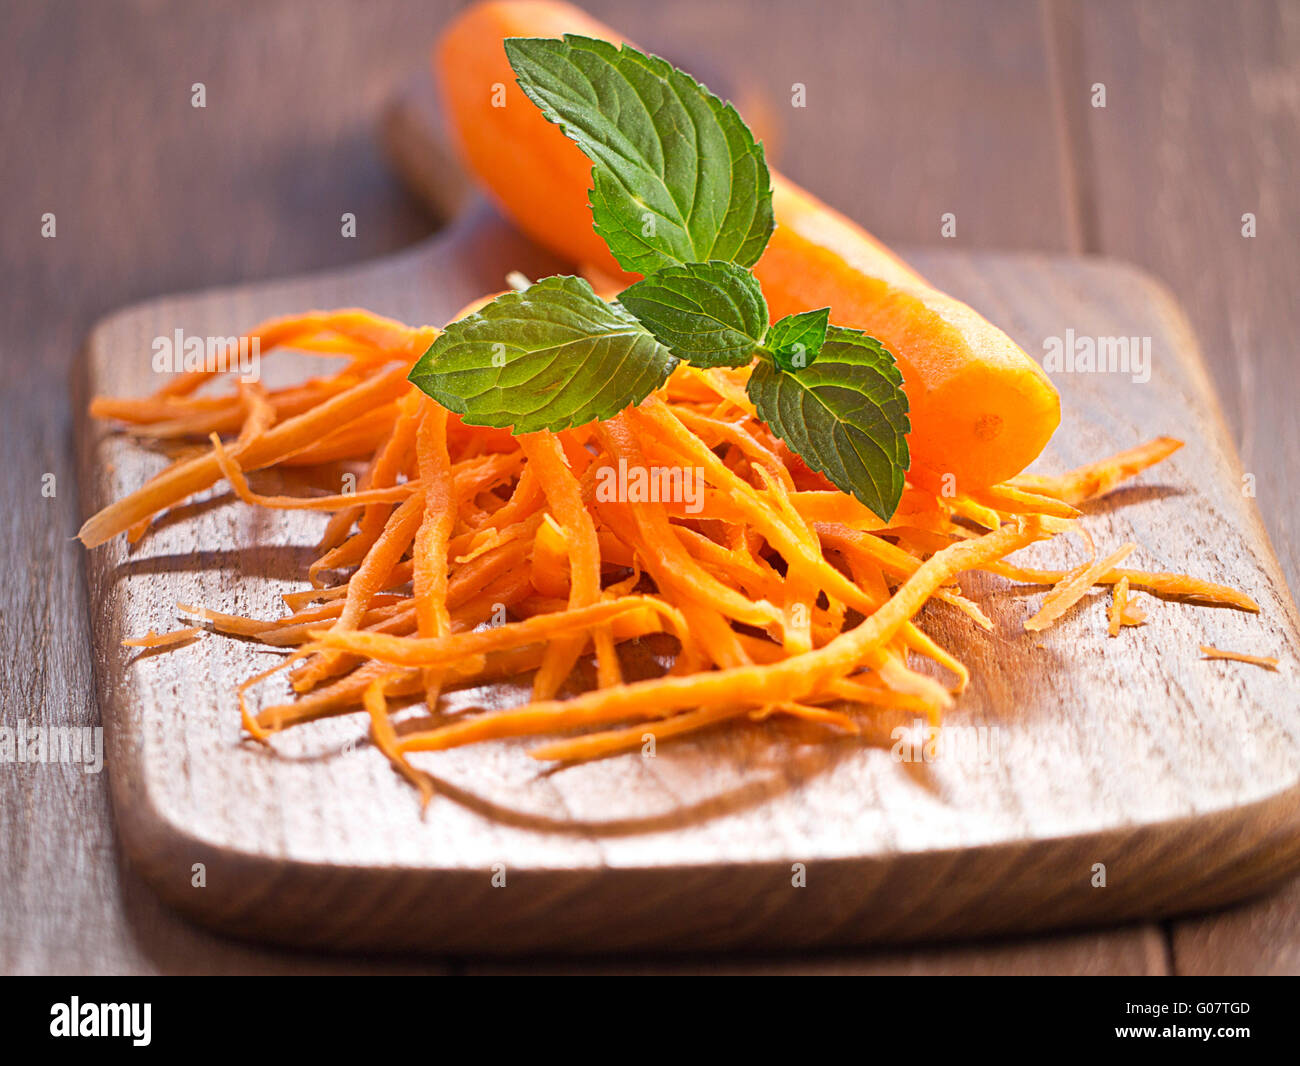 Carrots Julienne with a carrot on a wooden tray Stock Photo